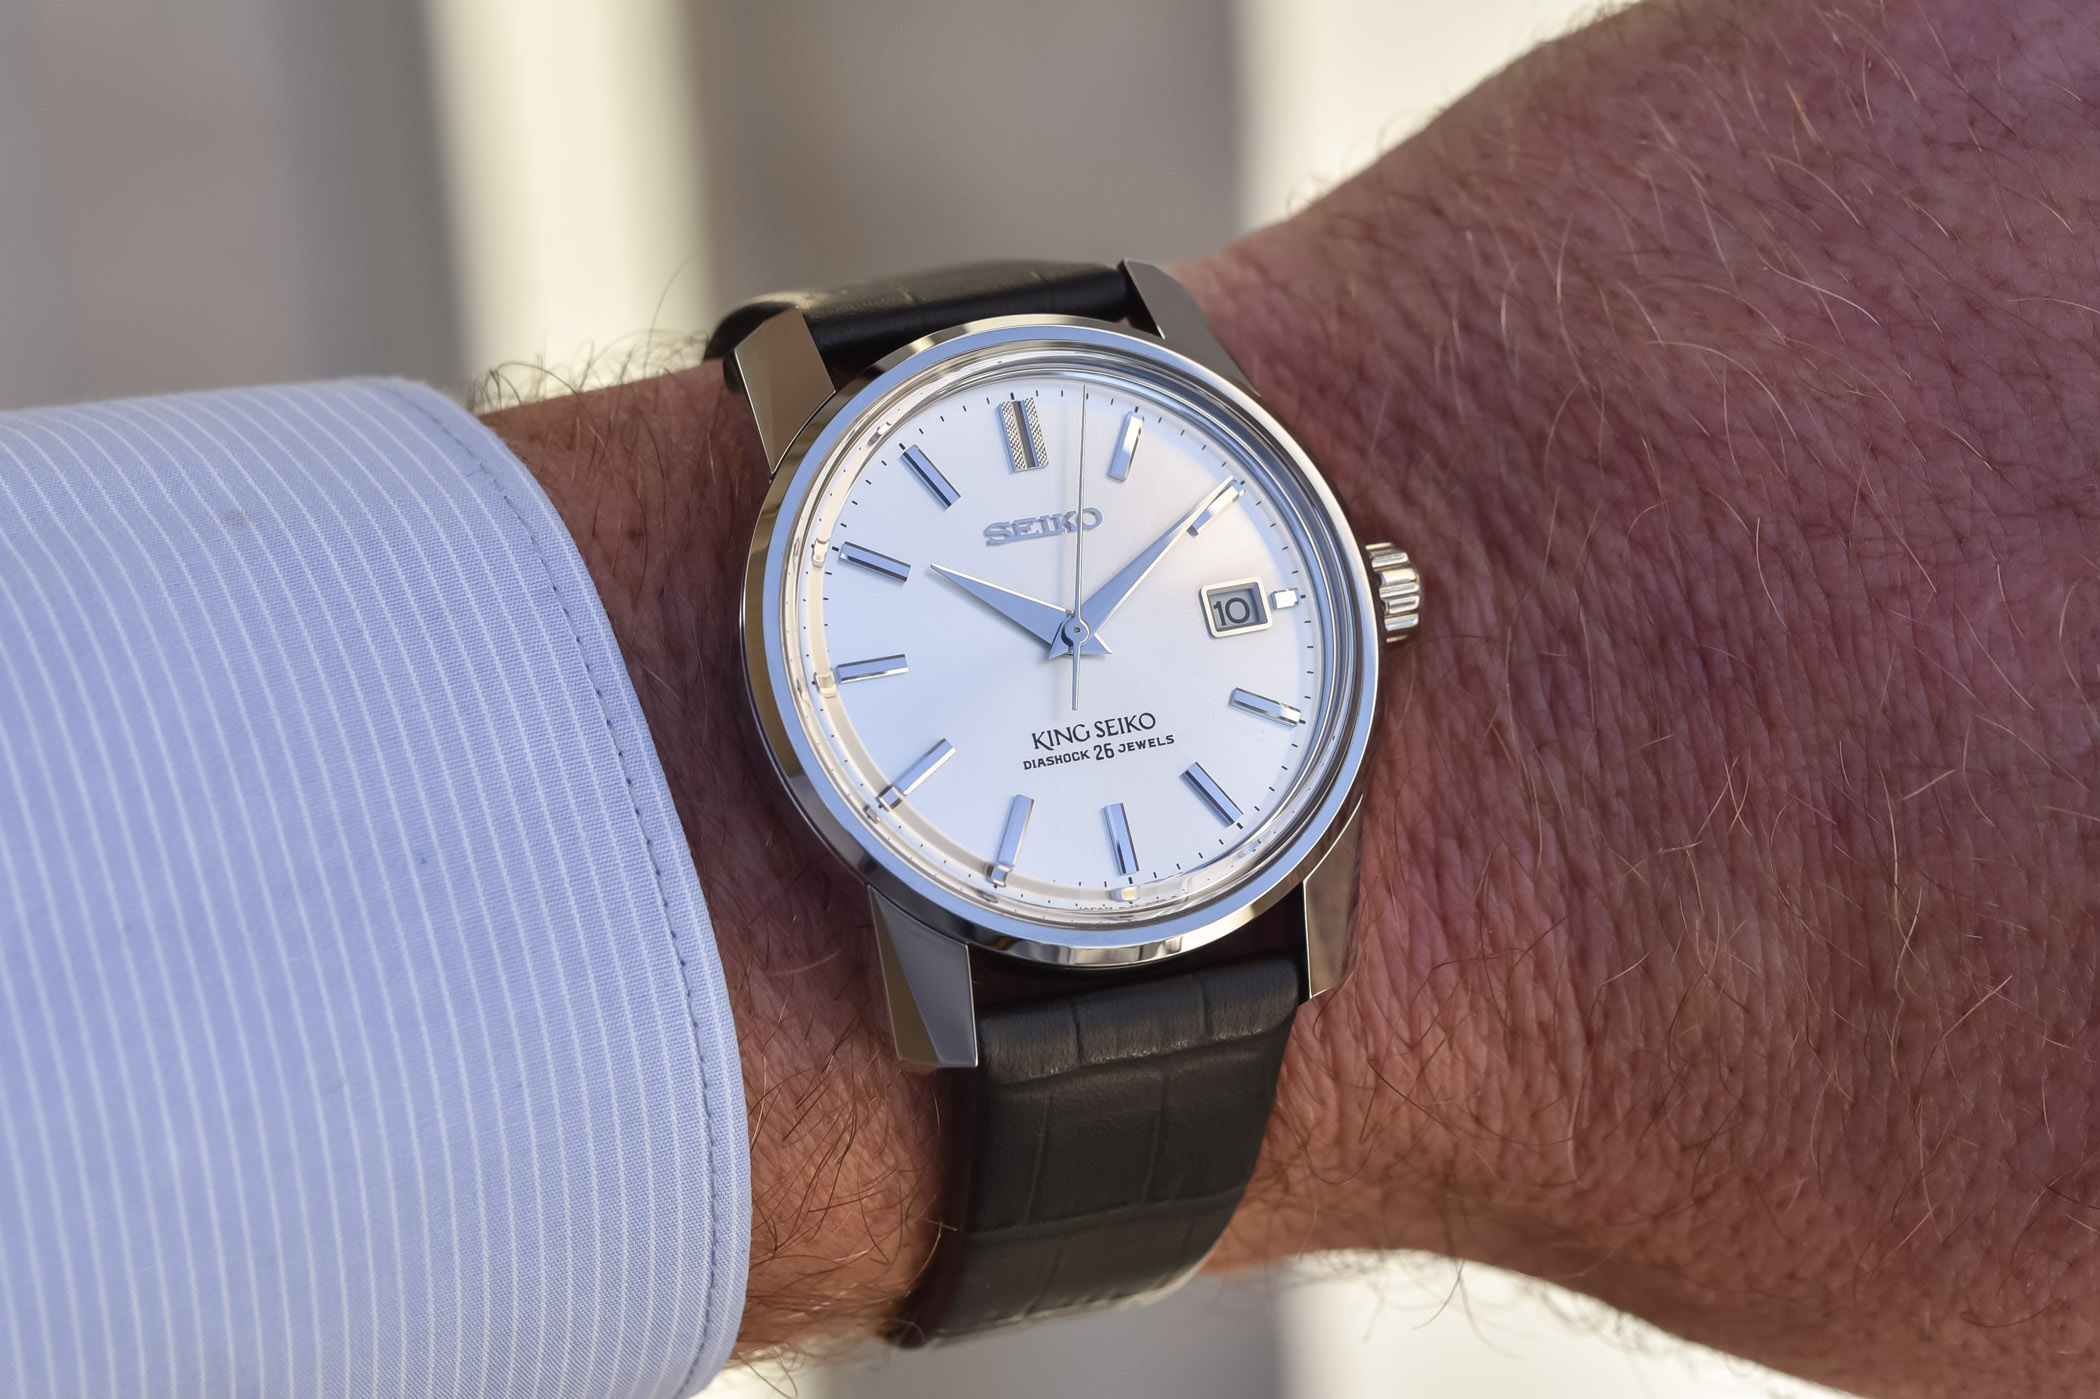 Seiko Re-Creation of King Seiko KSK SJE083 - Hands-On Review, Price